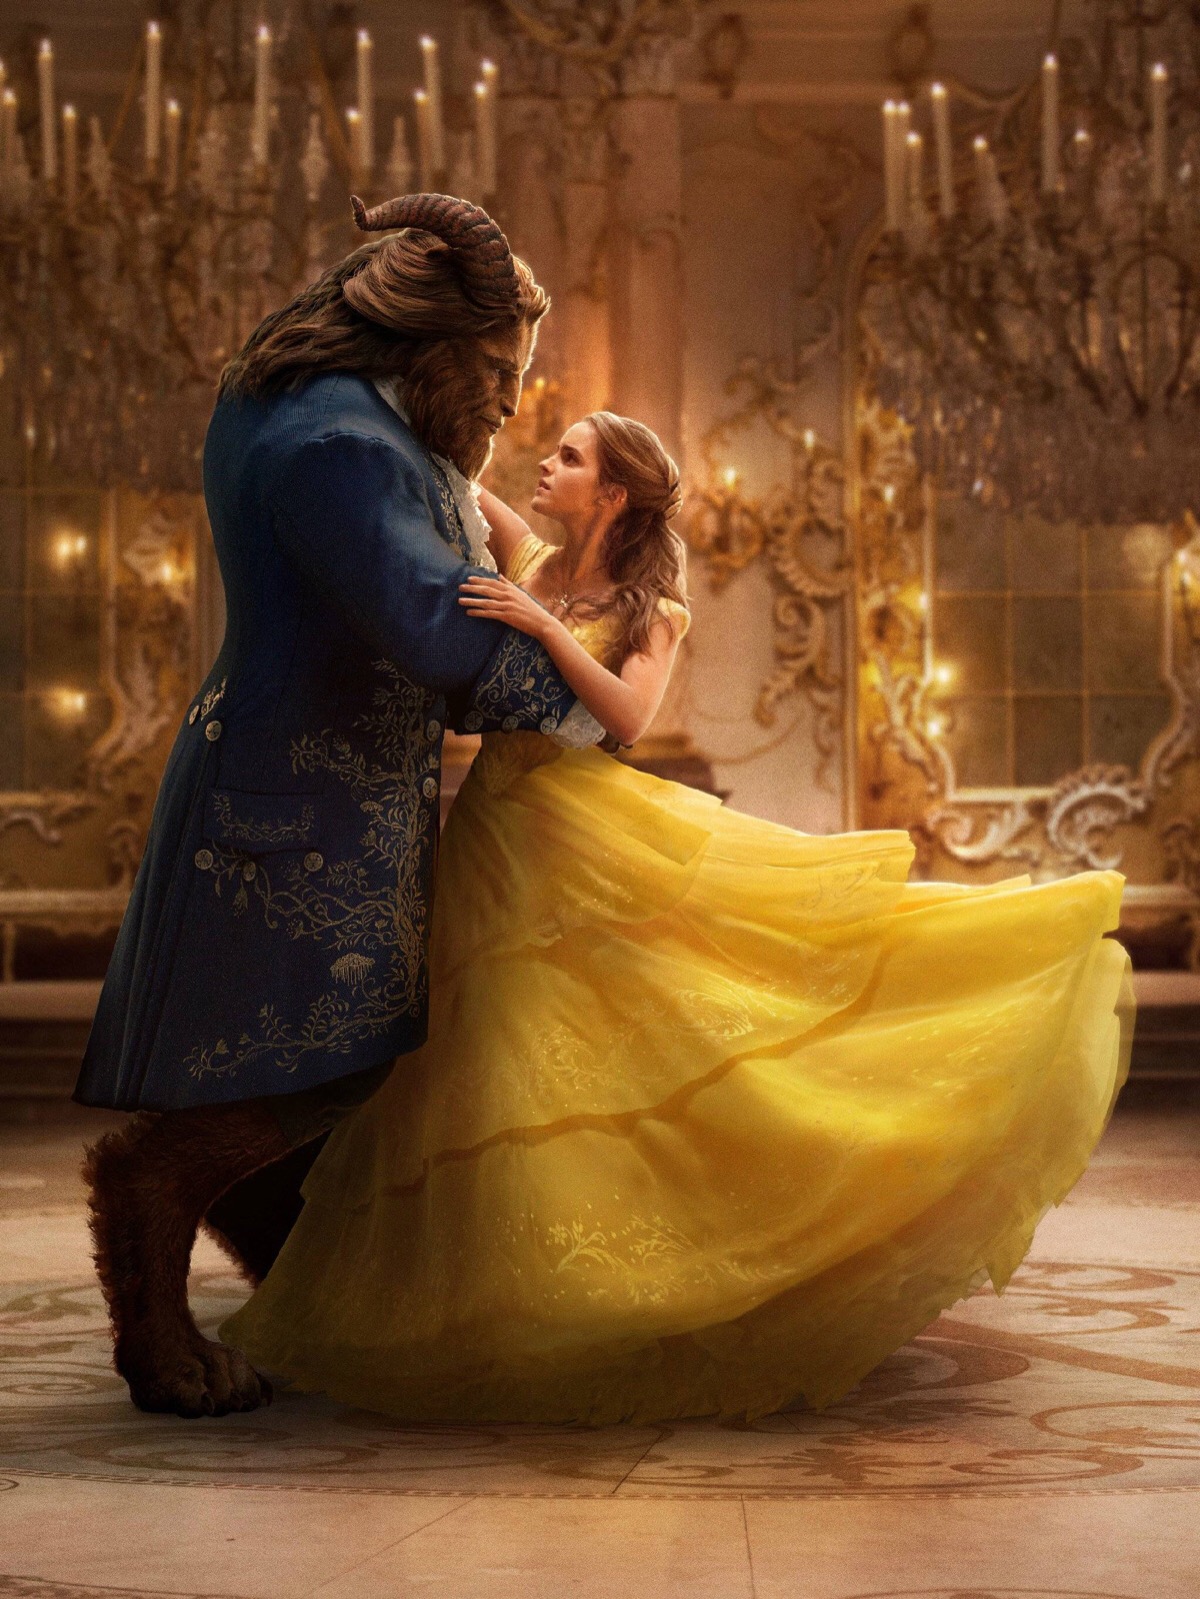 of #emma watson# and #dan stevens# in "beauty and the beast"